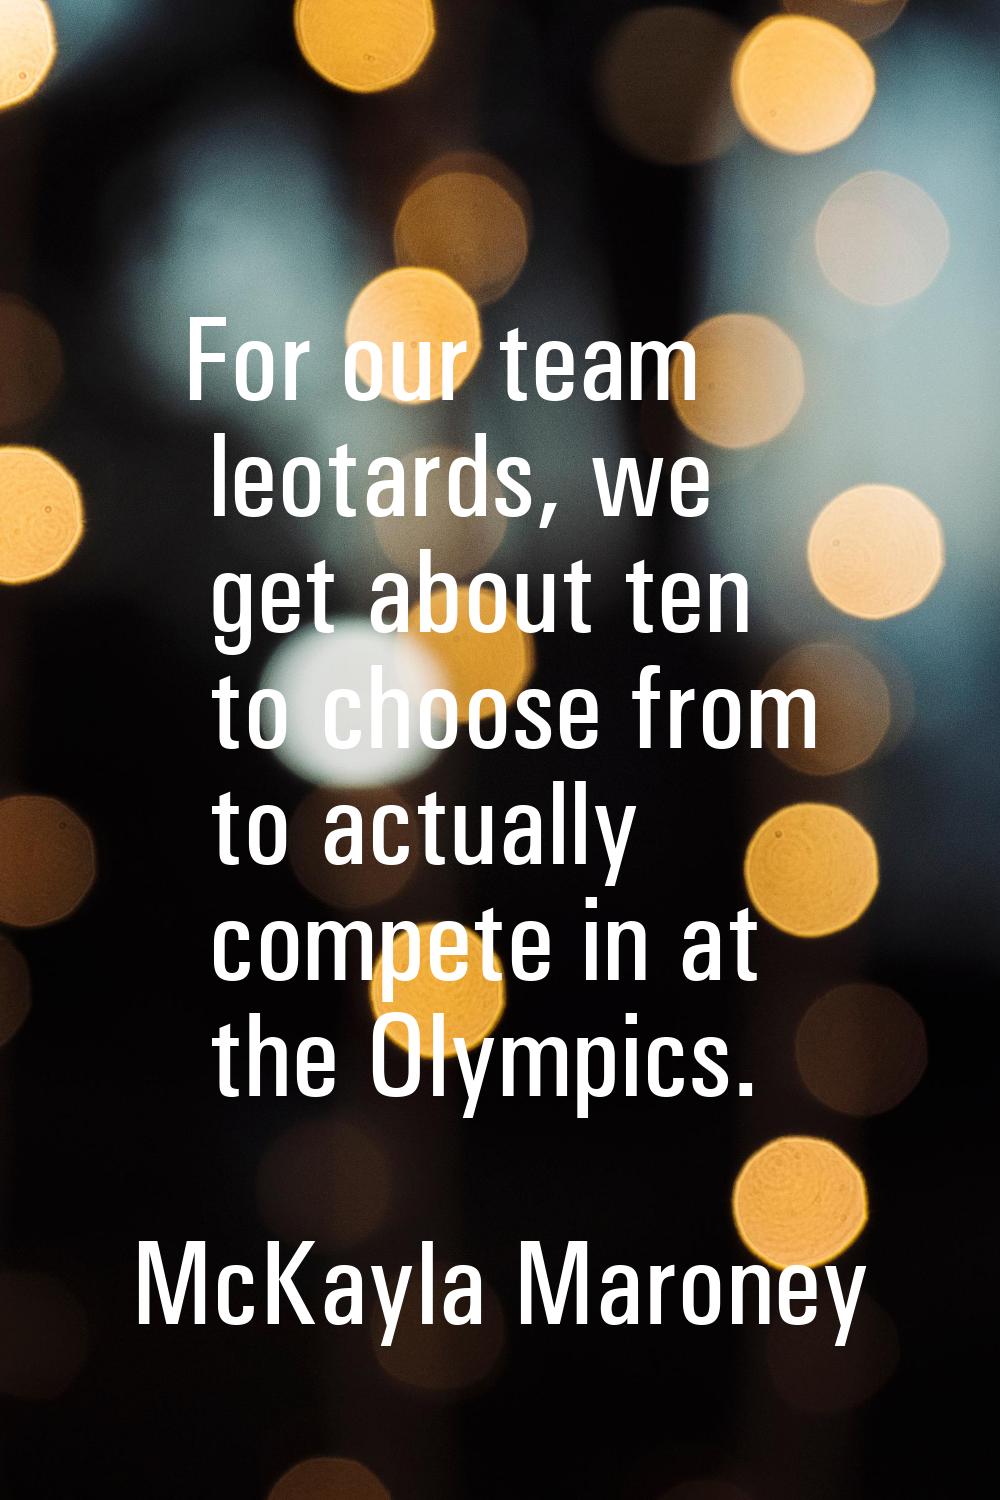 For our team leotards, we get about ten to choose from to actually compete in at the Olympics.